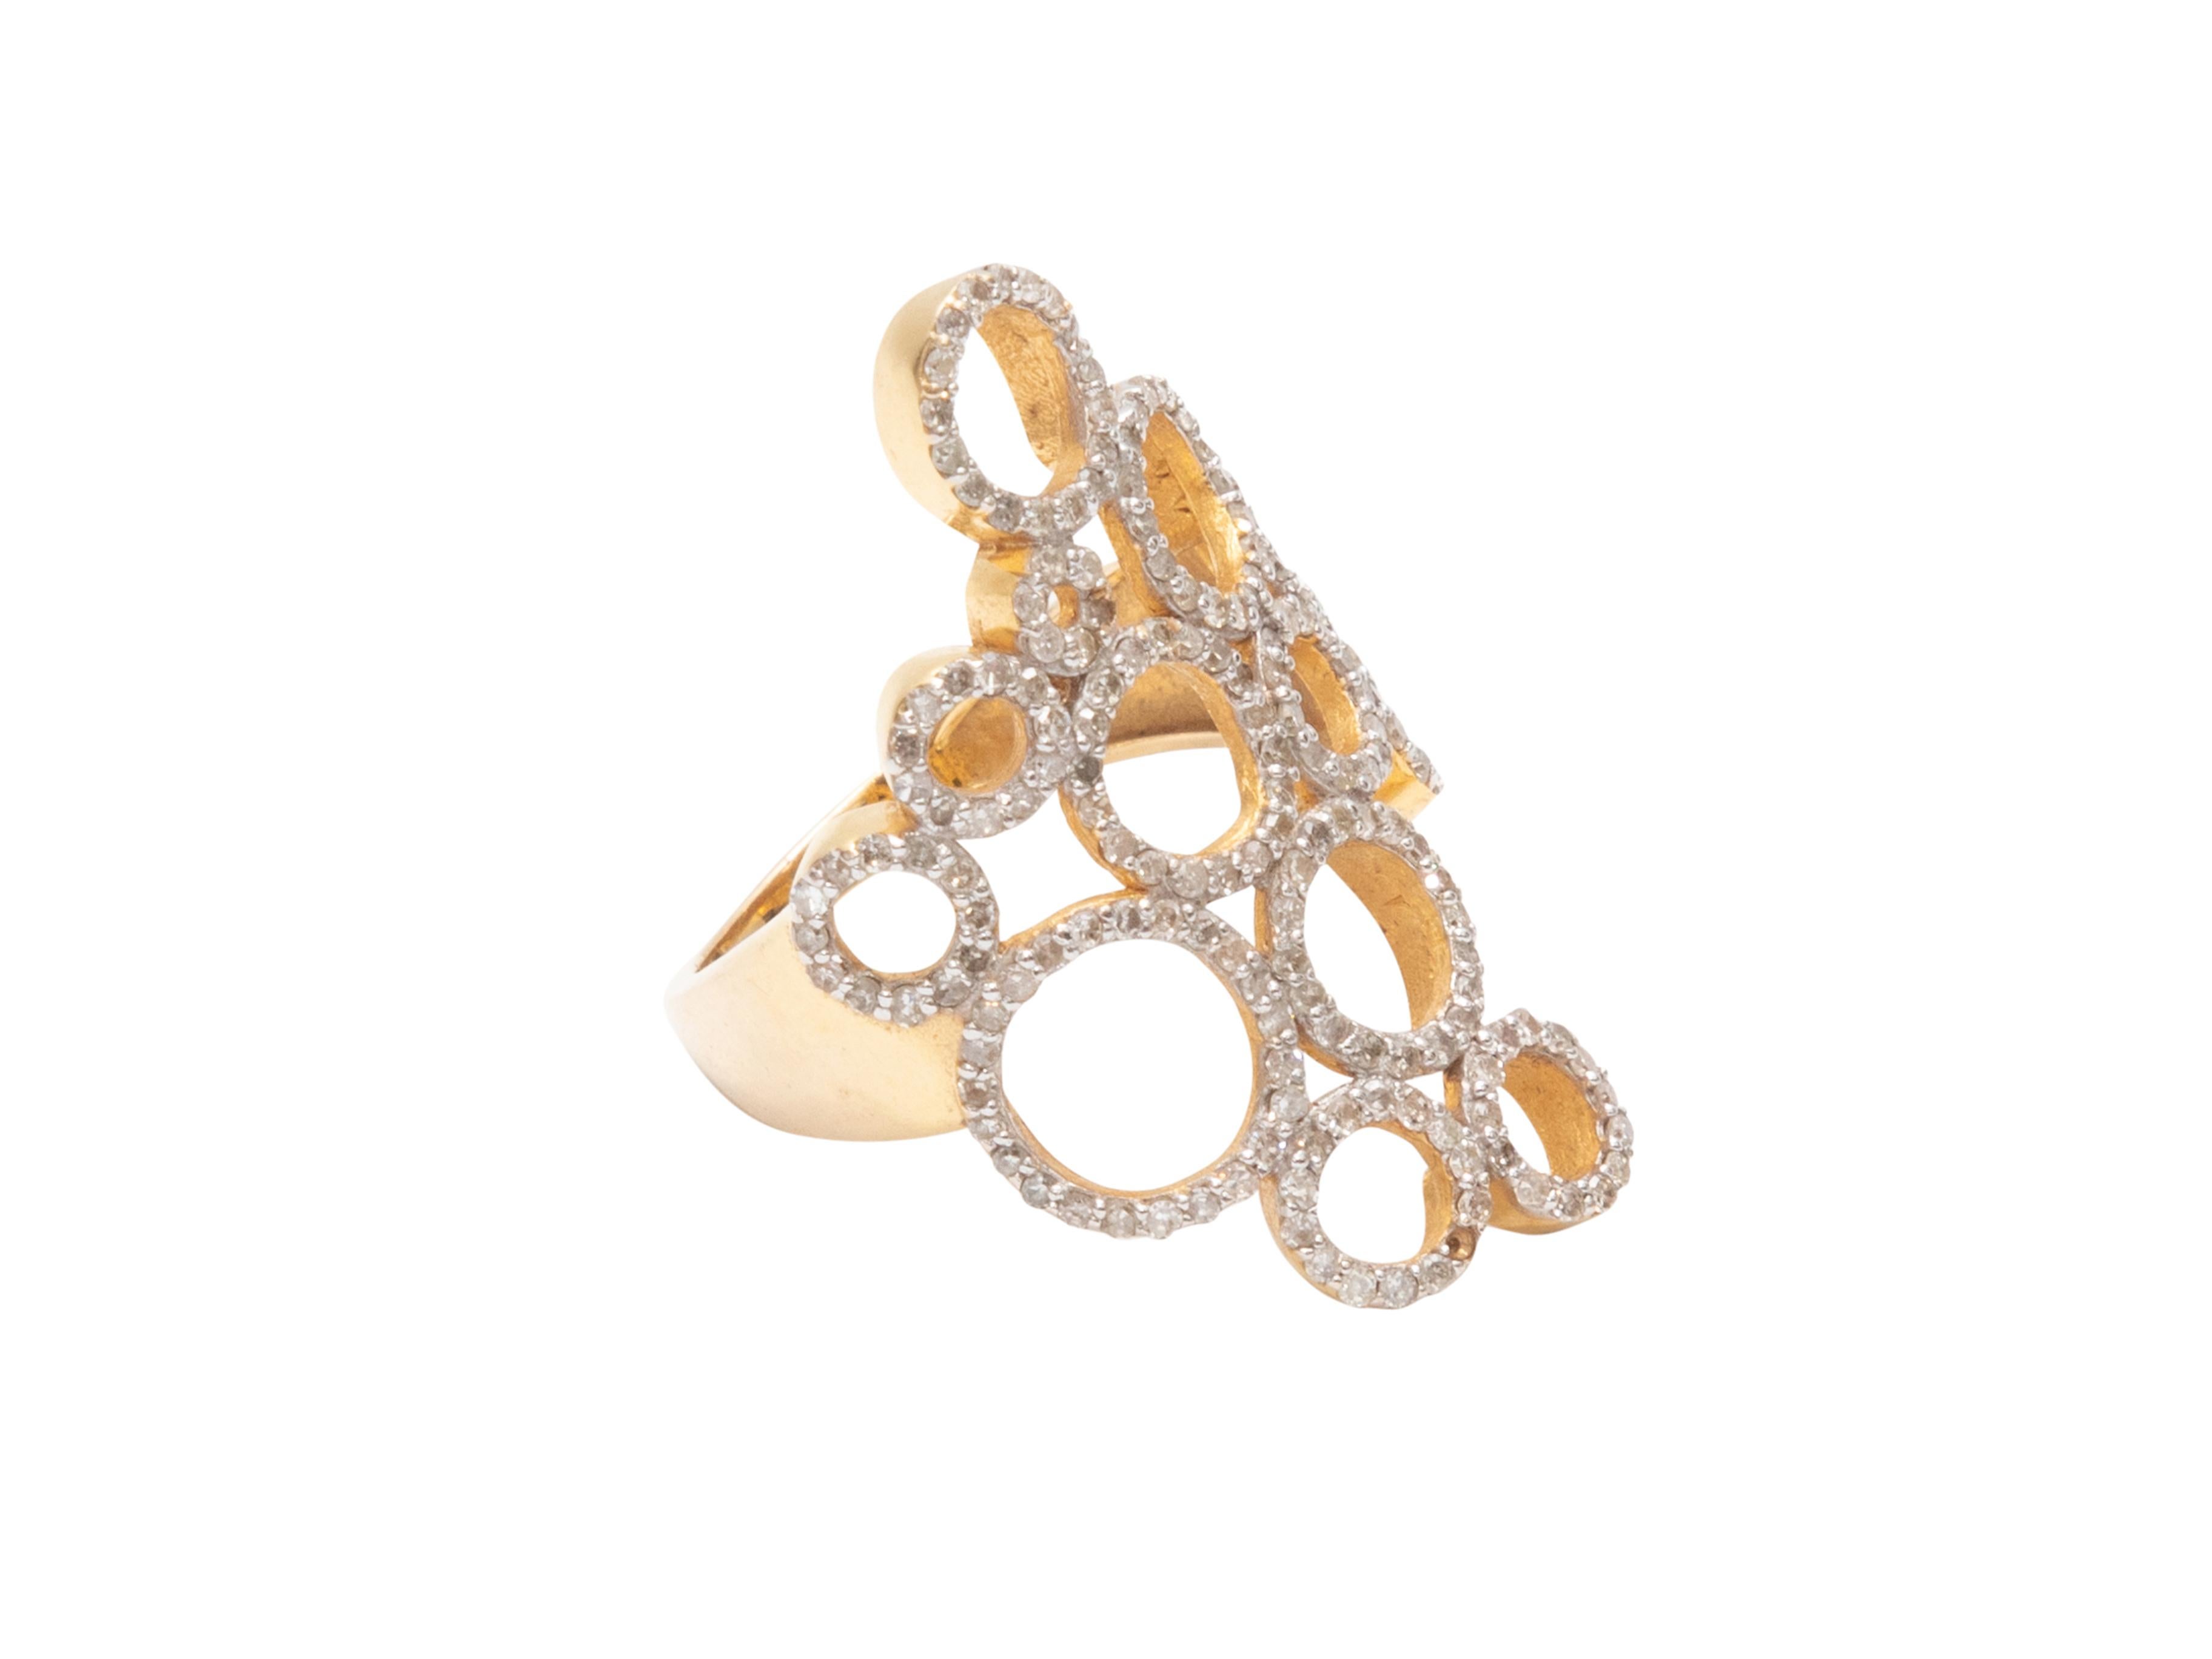 Product Details: Gold and pave diamond circles ring by Jennifer Miller. Designer size 7.

Condition: Pre-owned. Very good.

Please note this is a pre-owned item that may display signs of wear consistent with the condition listed above and shown in